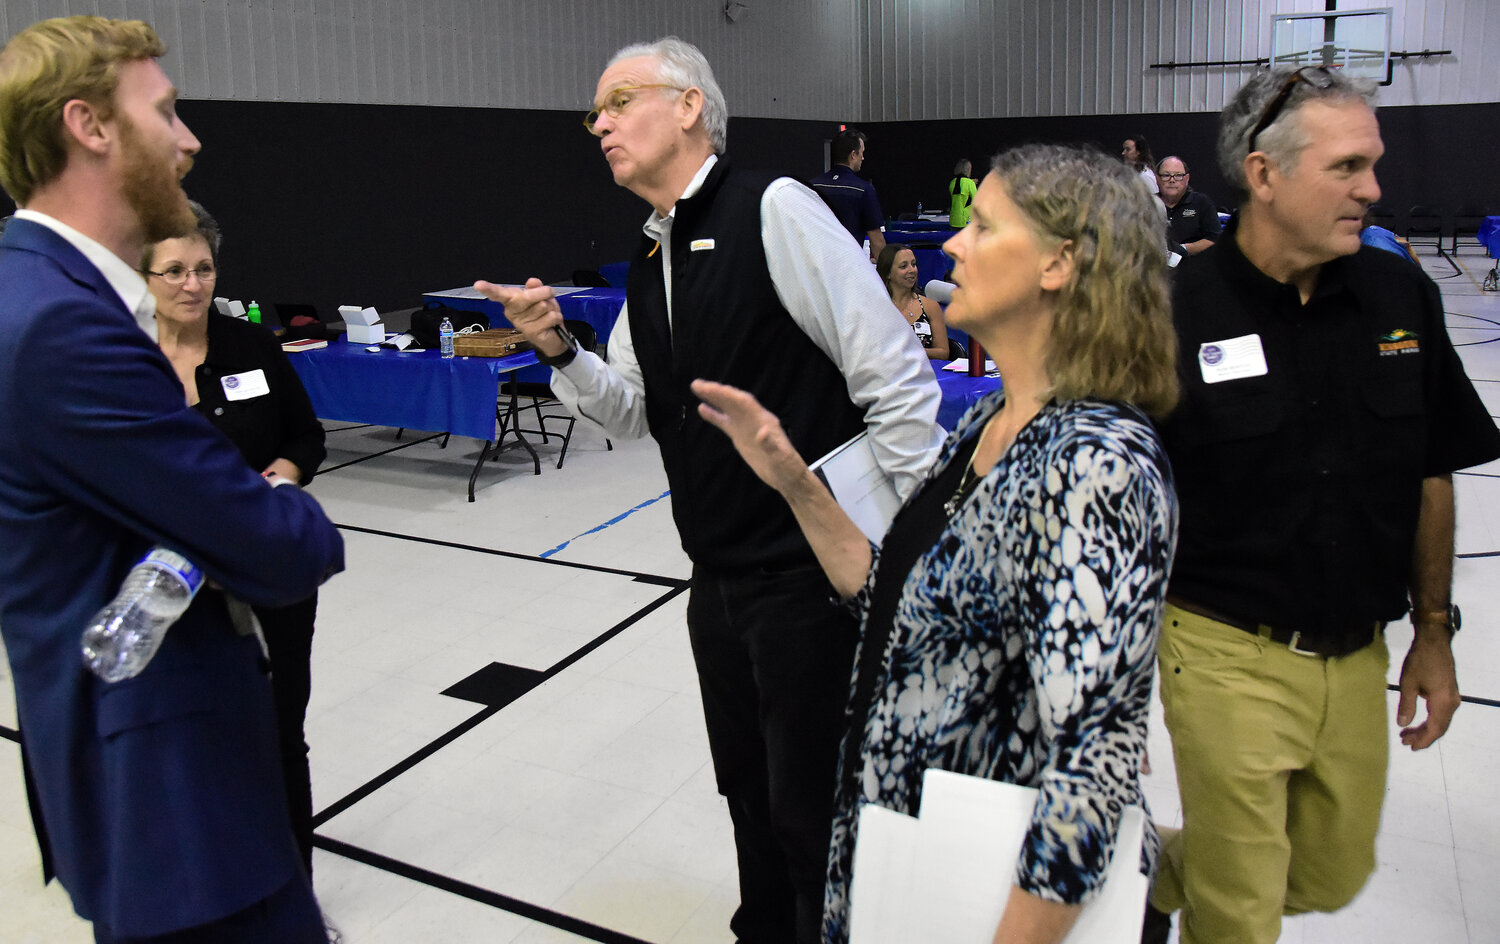 JAY NIXON, former governor of Missouri (center), visits Friday afternoon after speaking at the Rock Island Summit in Eldon with State Rep. Peter Merideth, D-St. Louis, and Owensville resident and Friends of the Rock Island Trail member Chrysa Niewald.